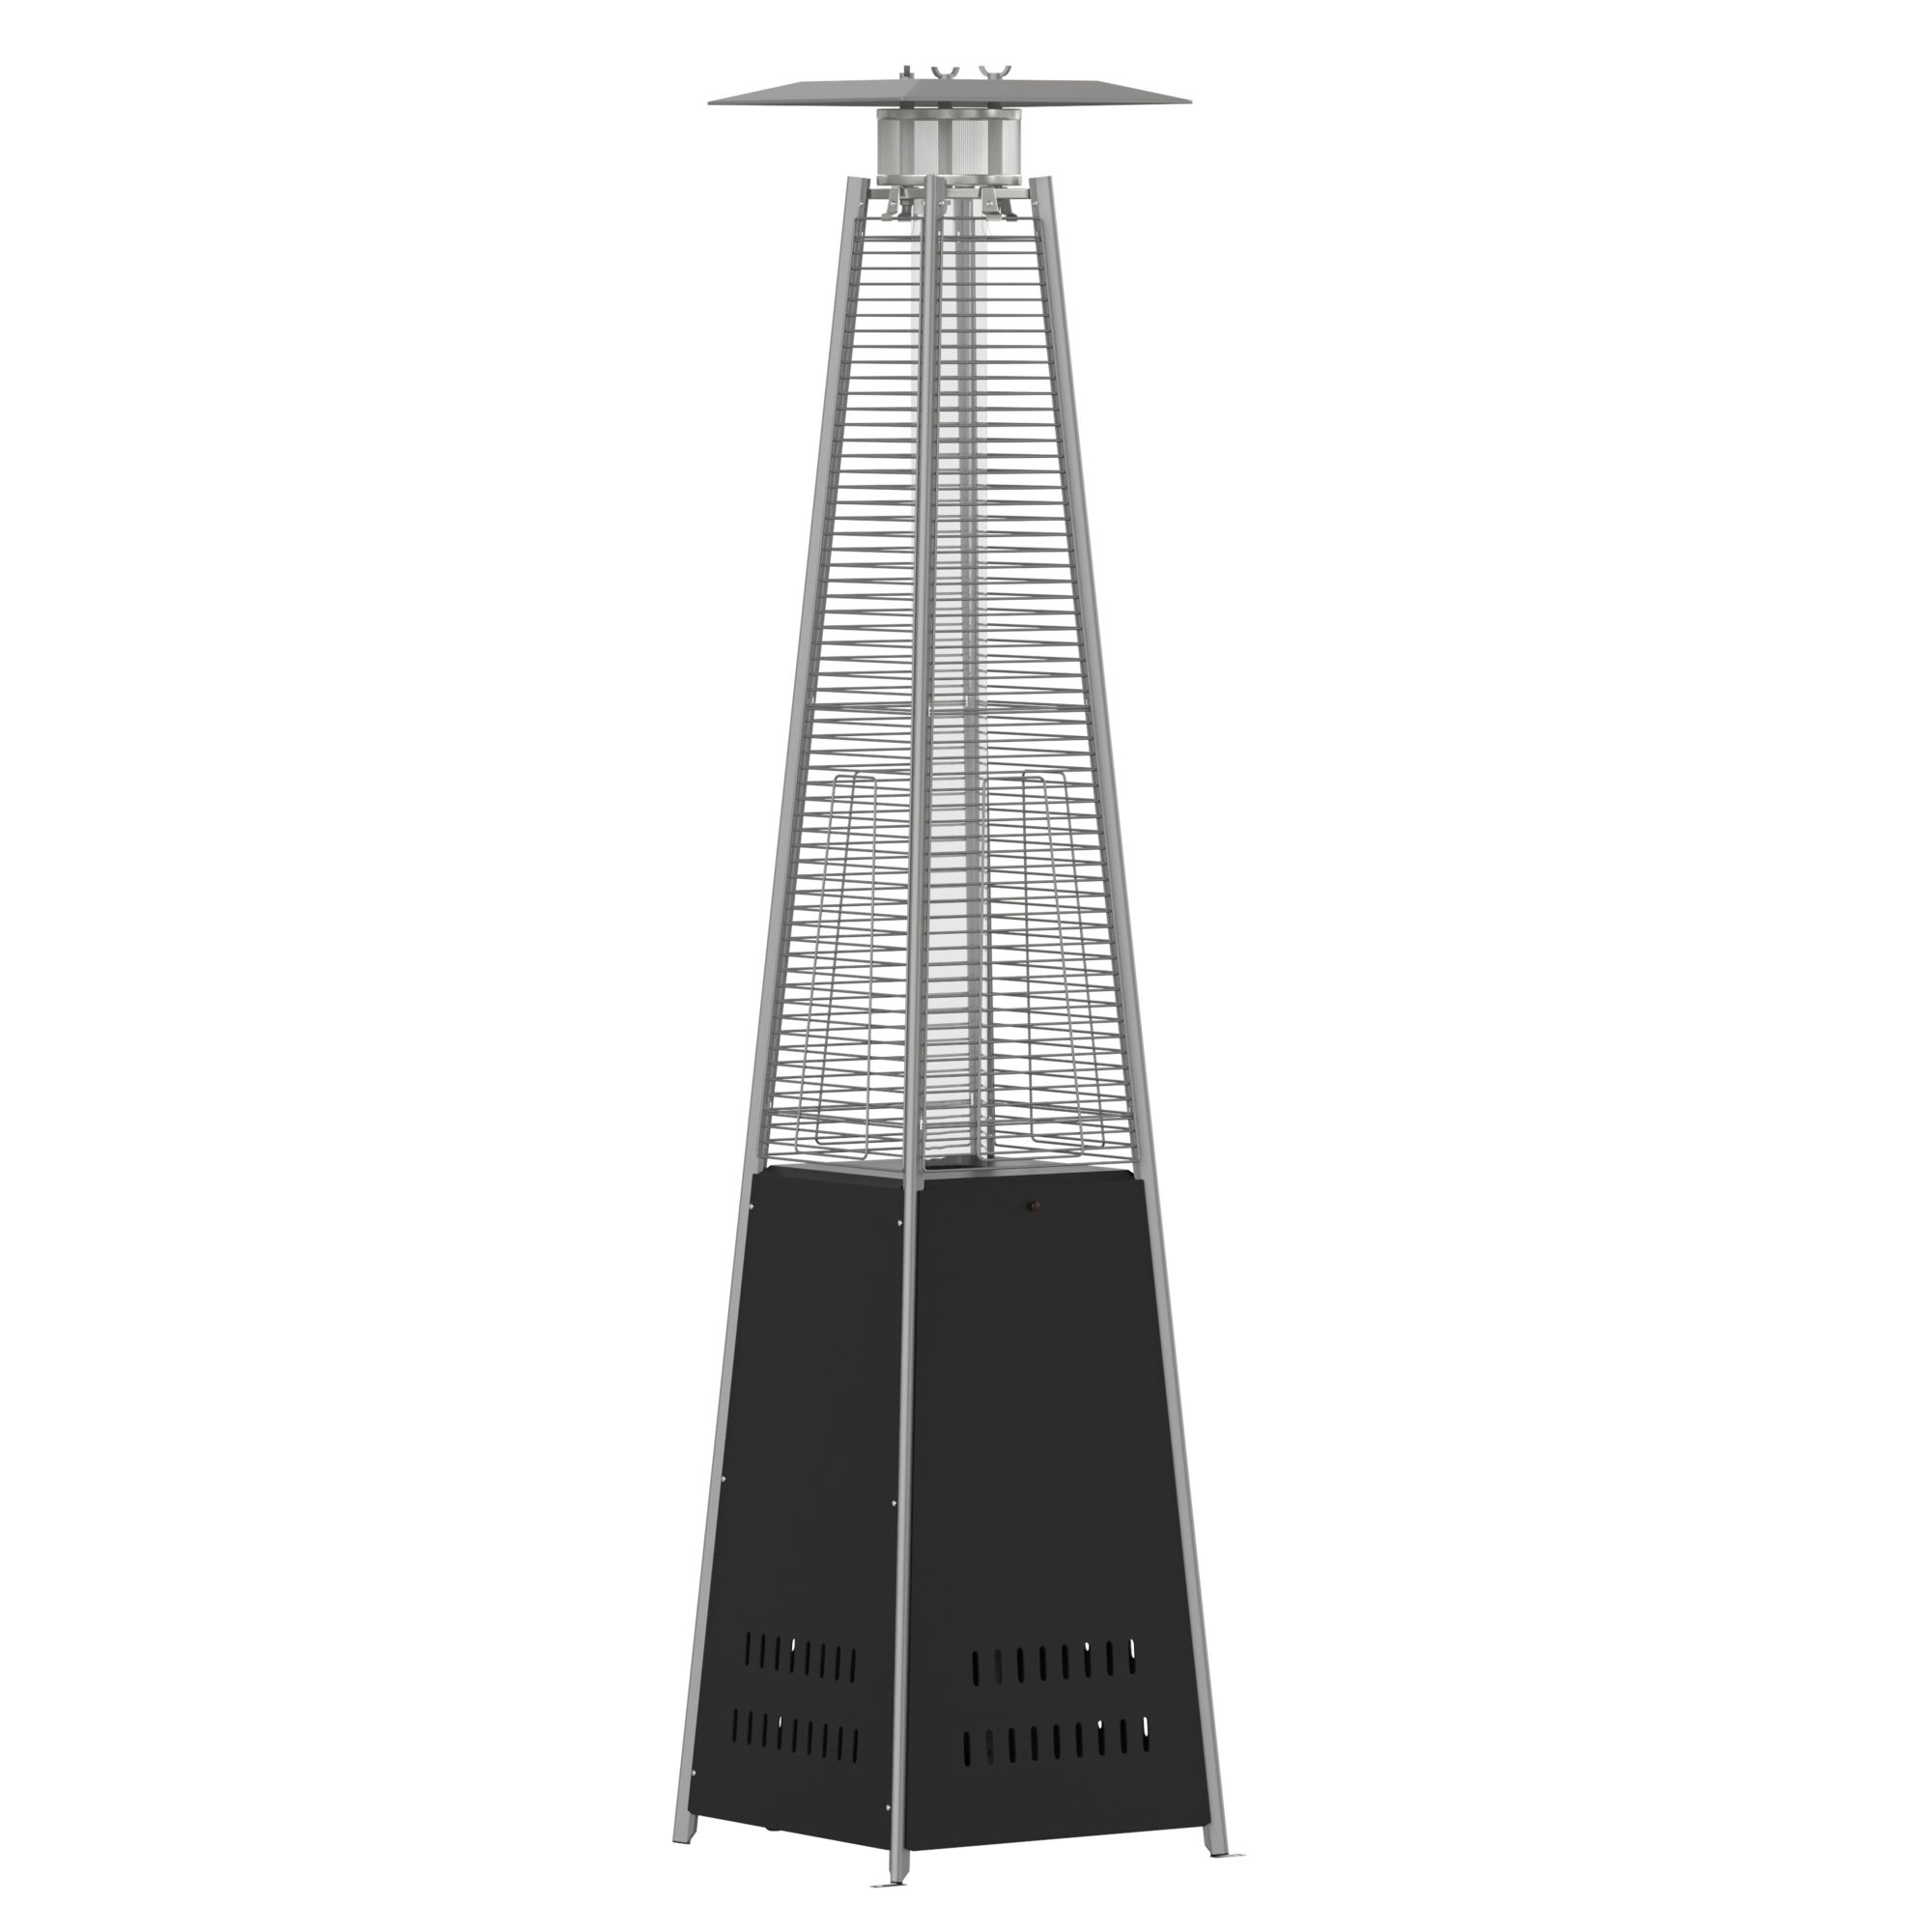 Flash Furniture, Pyramid Outdoor Patio Heater-Black -7.5ft. Tall, Fuel Type Propane, Diameter 0 in, Material Stainless Steel, Model NANFSDC02BK